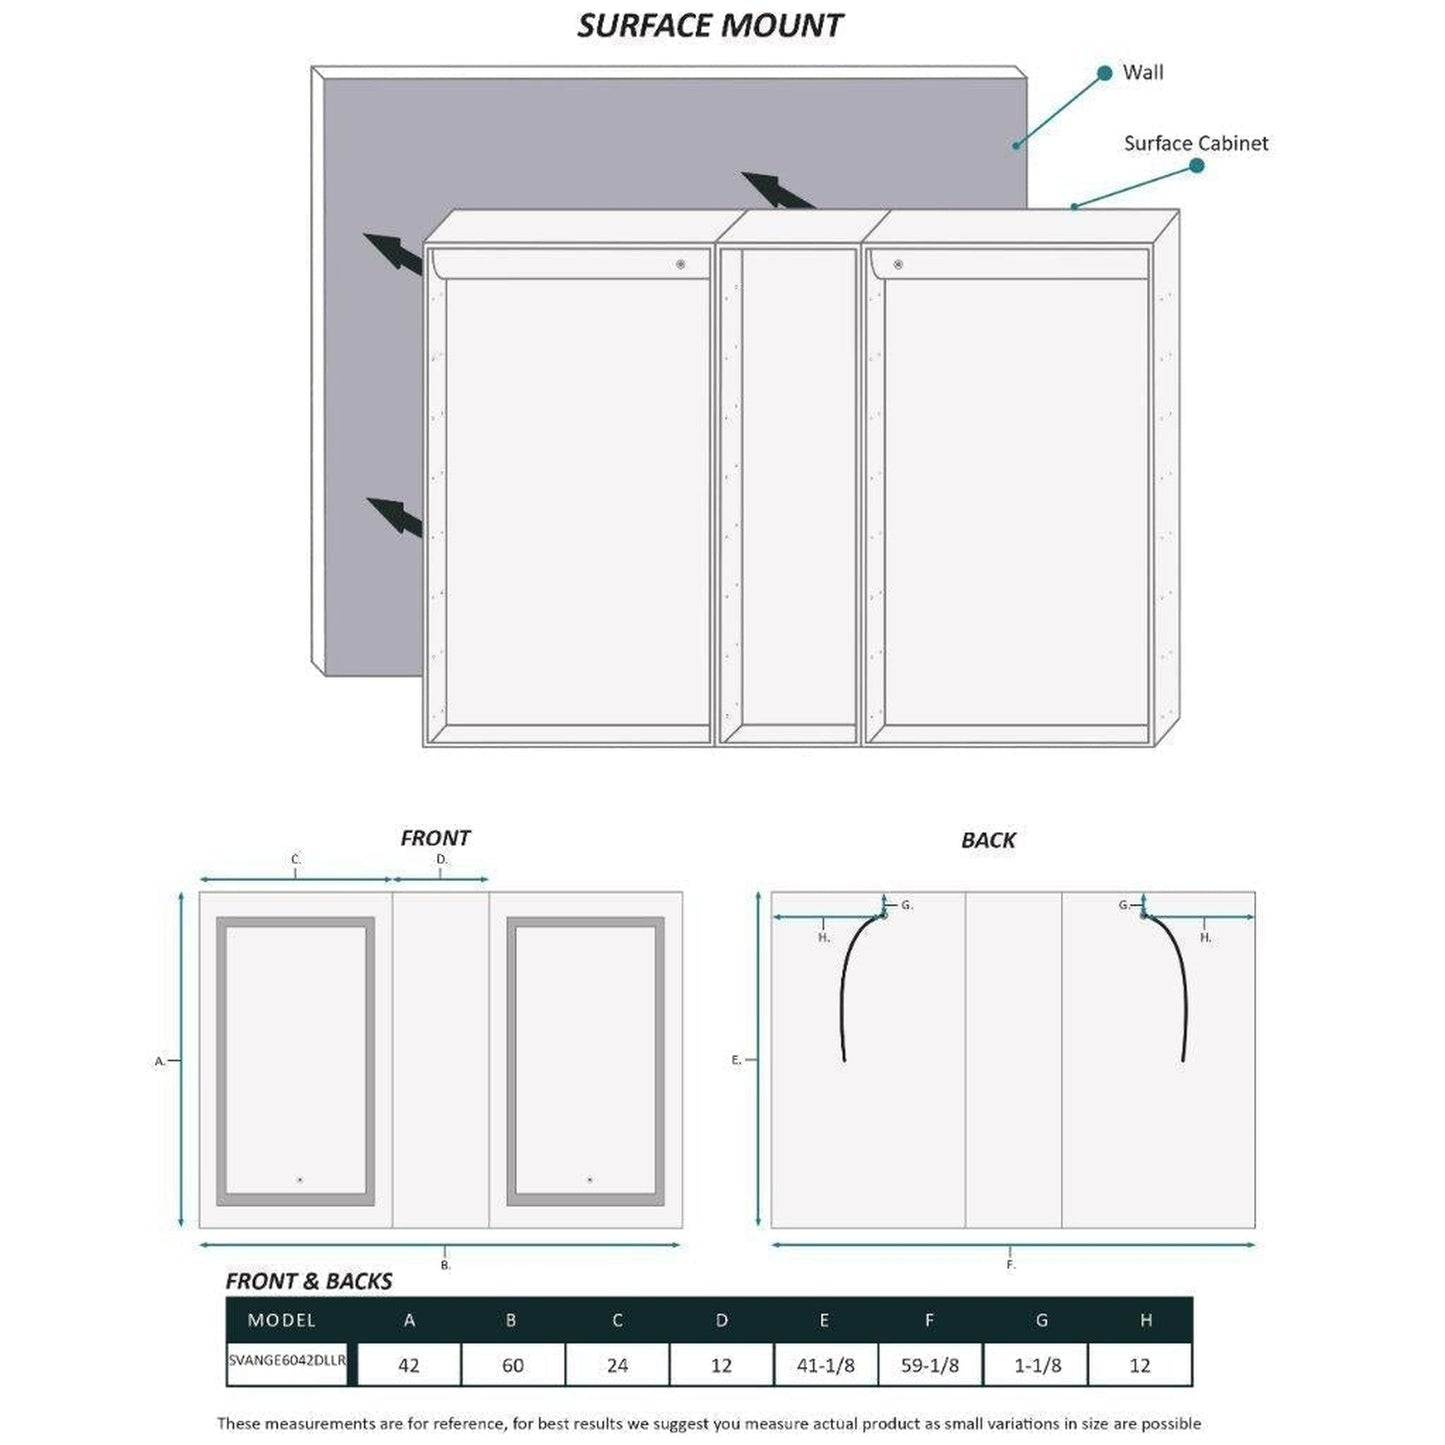 Krugg Reflections Svange 60" x 42" 5000K Double Left-Left-Right Opening Recessed/Surface-Mount Illuminated Silver Backed LED Medicine Cabinet Mirror With Built-in Defogger, Dimmer and Electrical Outlet